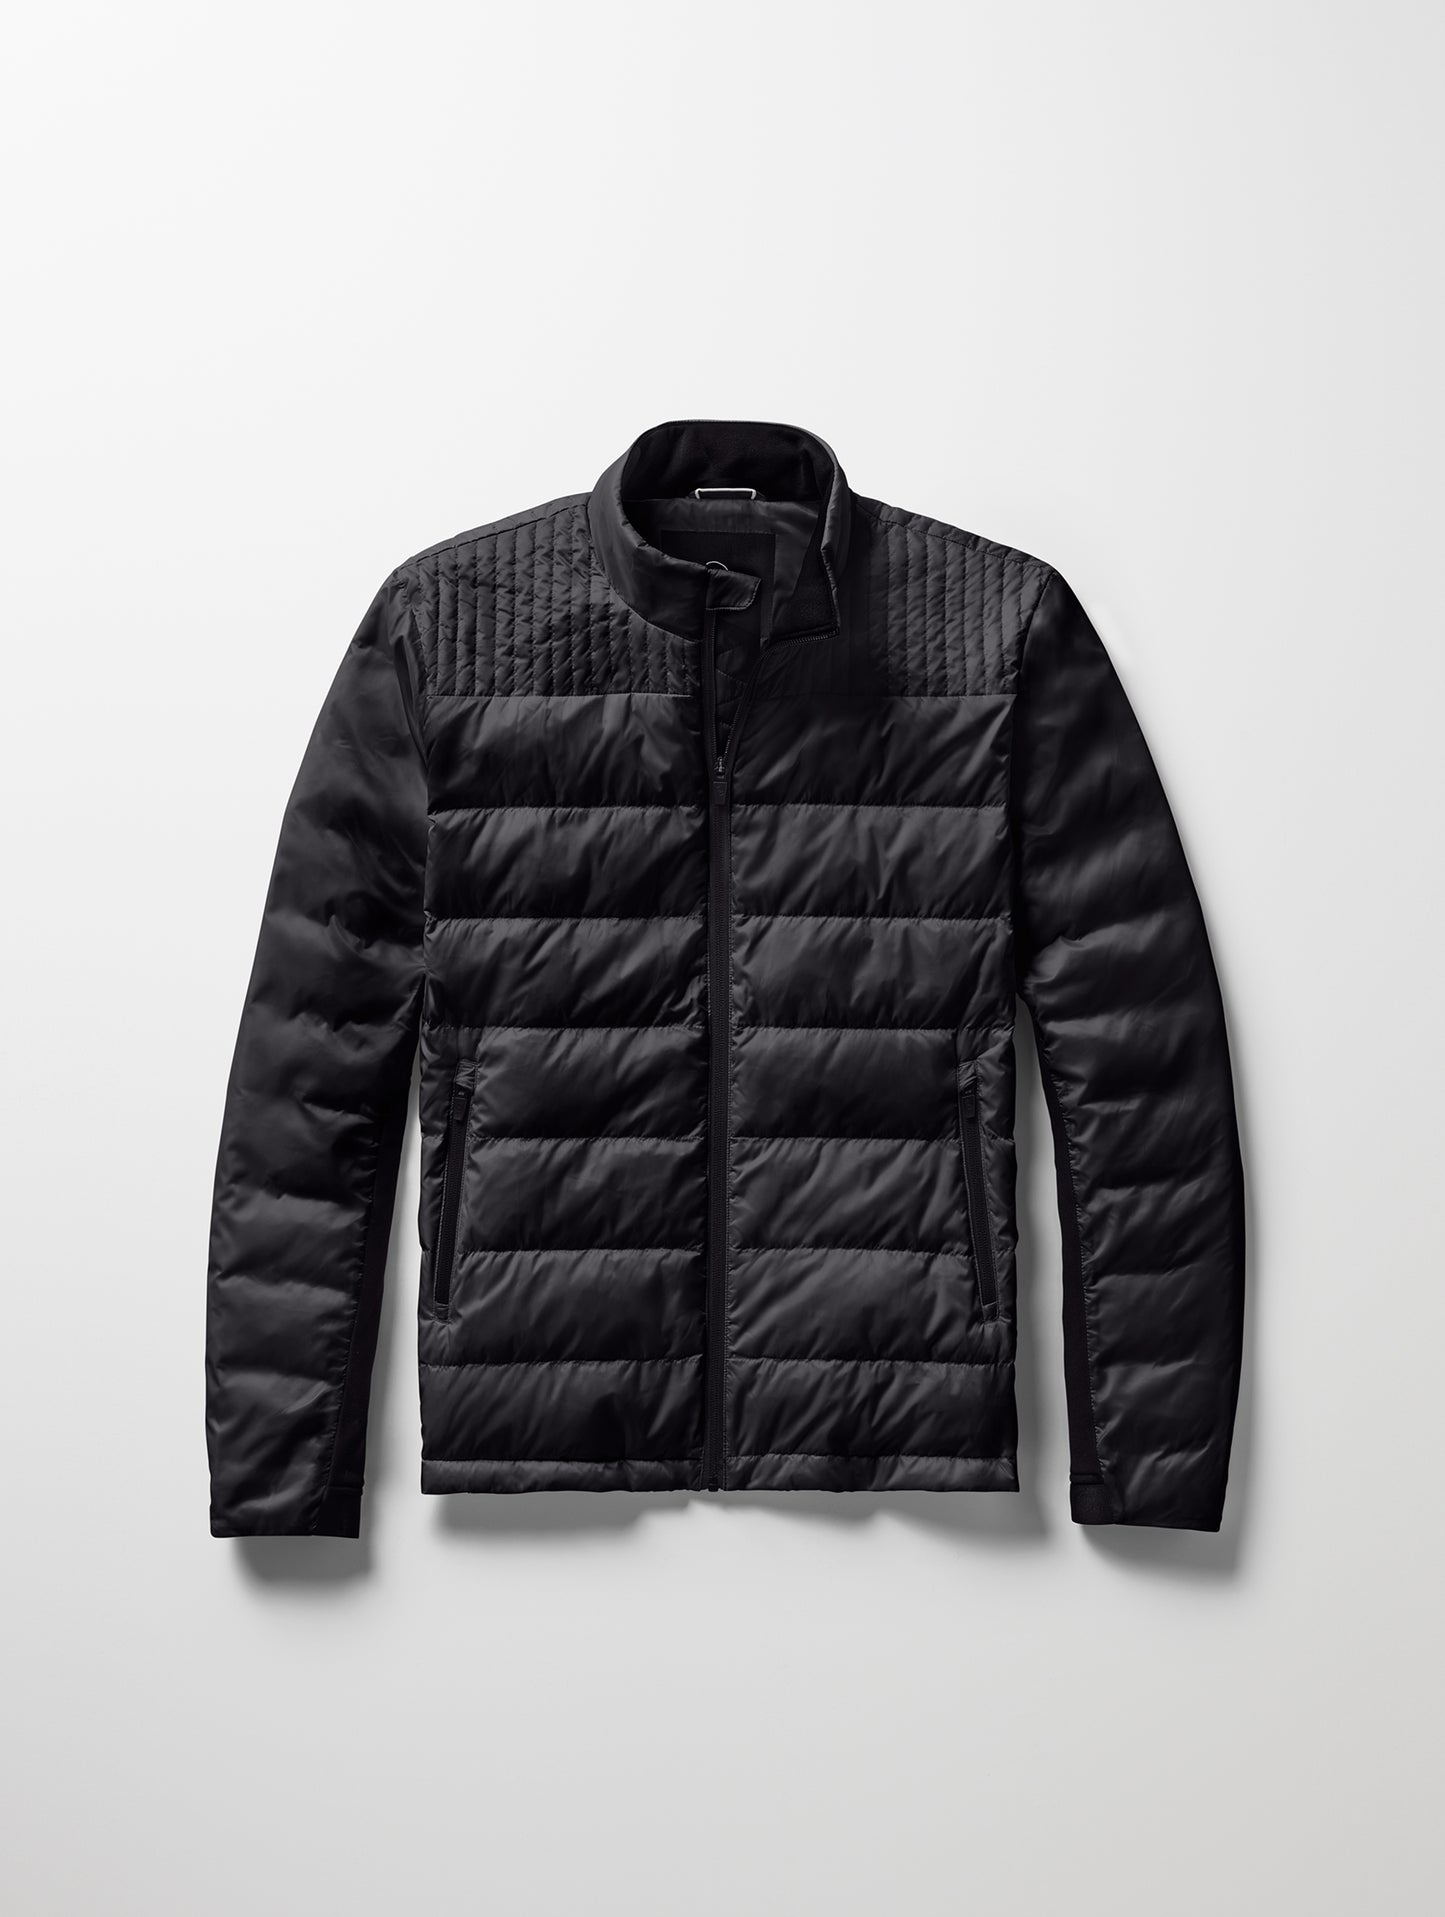 black insulated jacket from AETHER Apparel